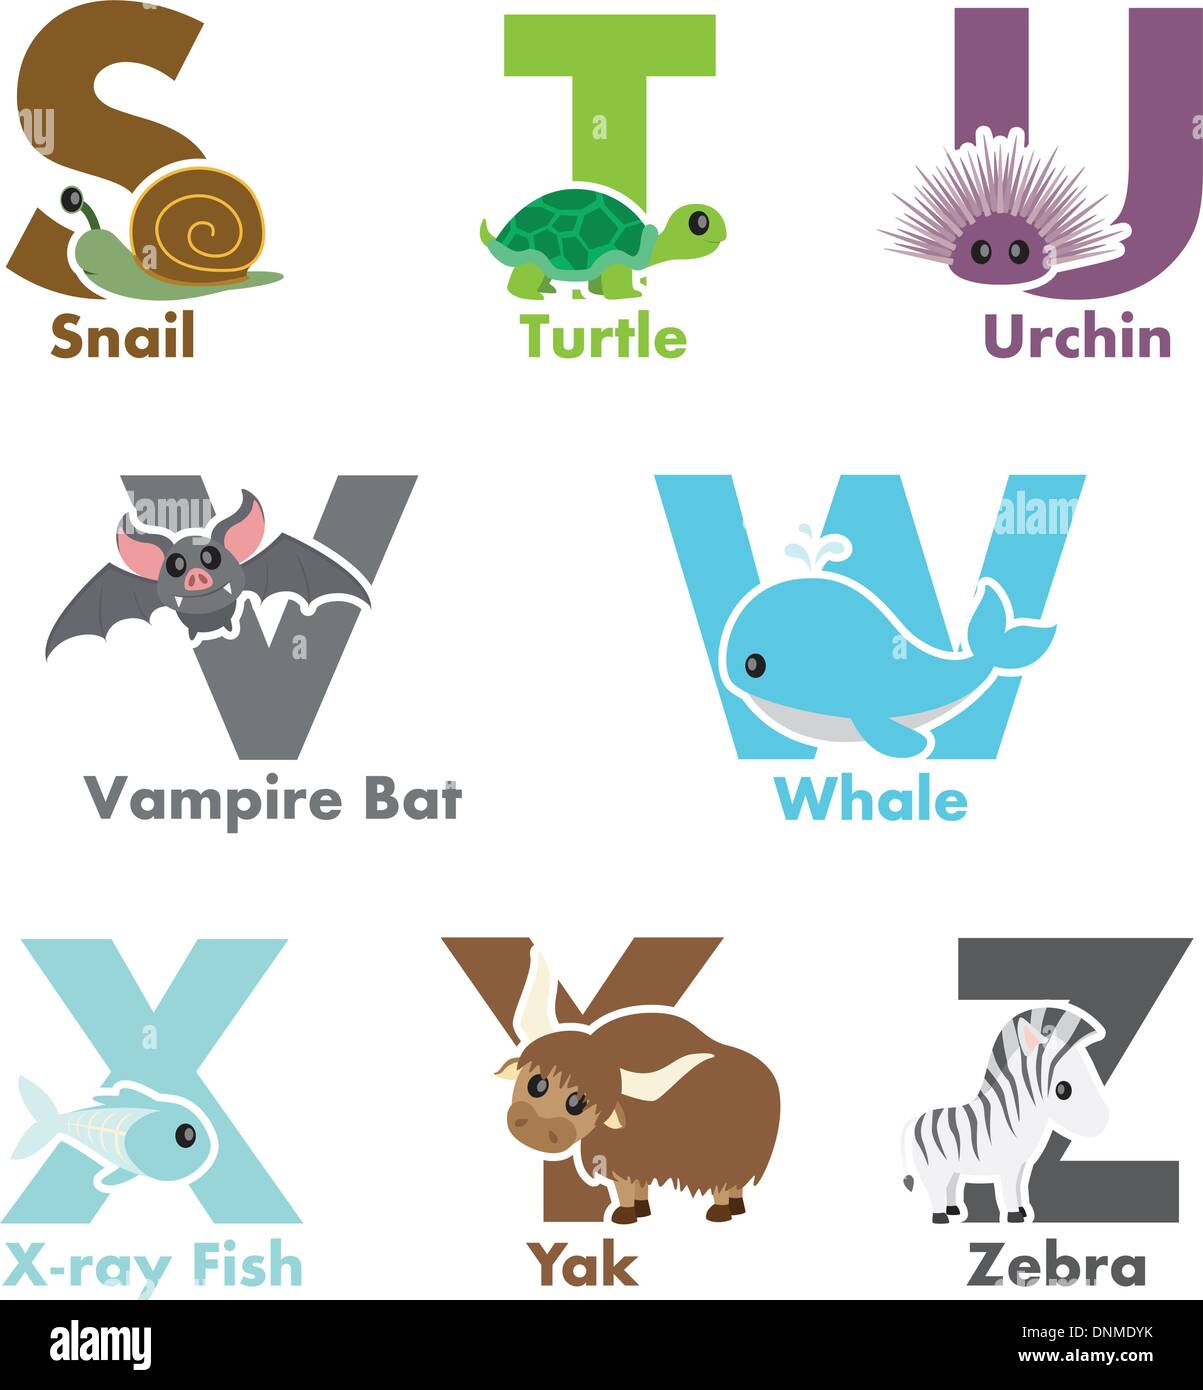 A vector illustration of alphabet animals from S to Z Stock Vector